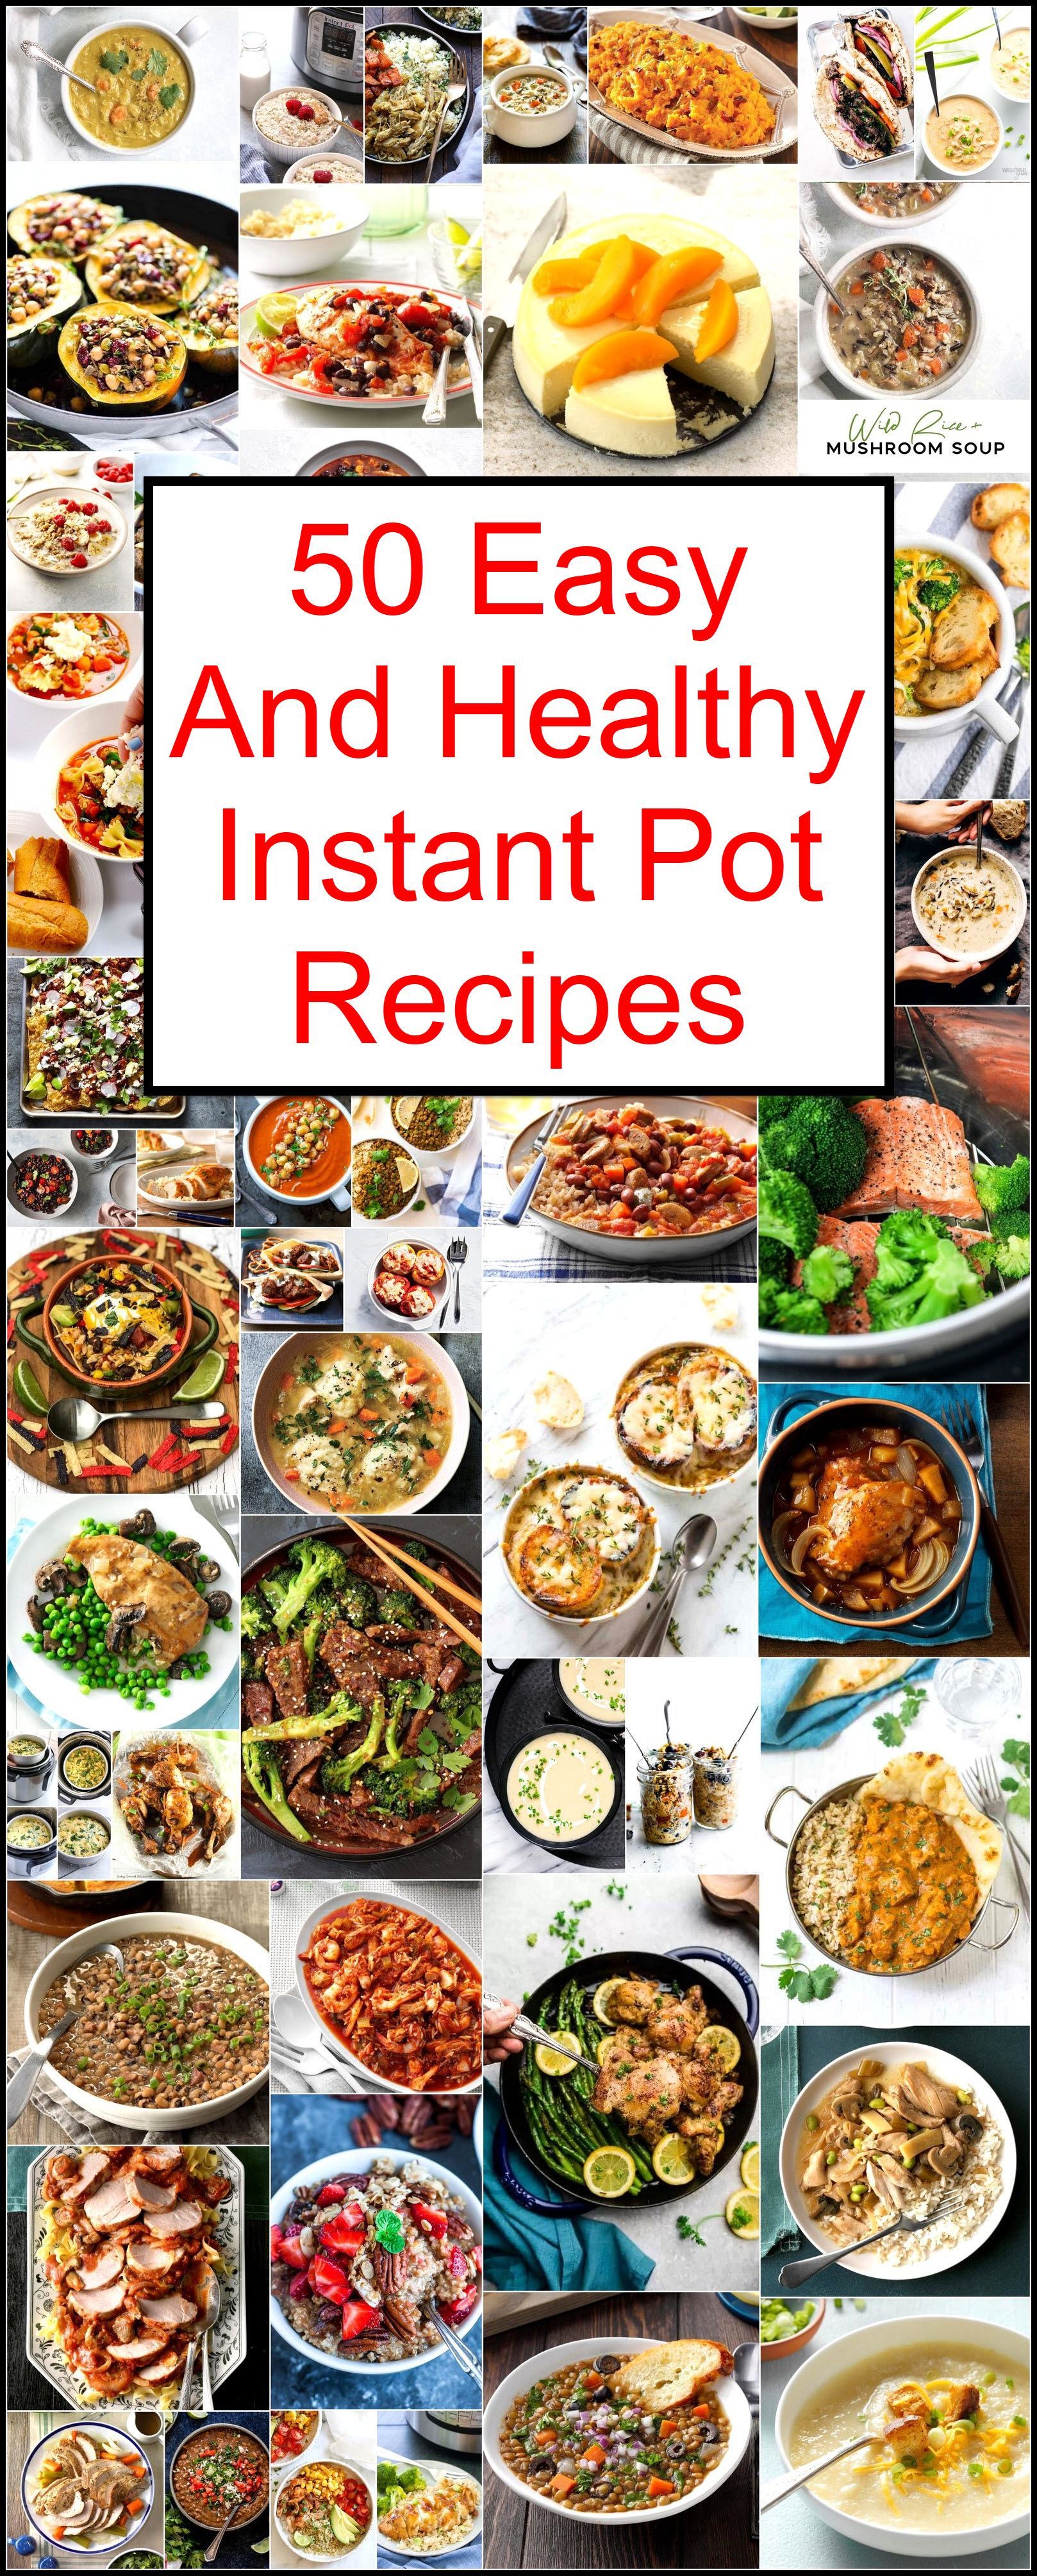 50 Easy And Healthy Instant Pot Recipes | Instant Pot Recipes – Most Popular And Easy Insta Pot Recipes -   19 healthy recipes For Two link ideas